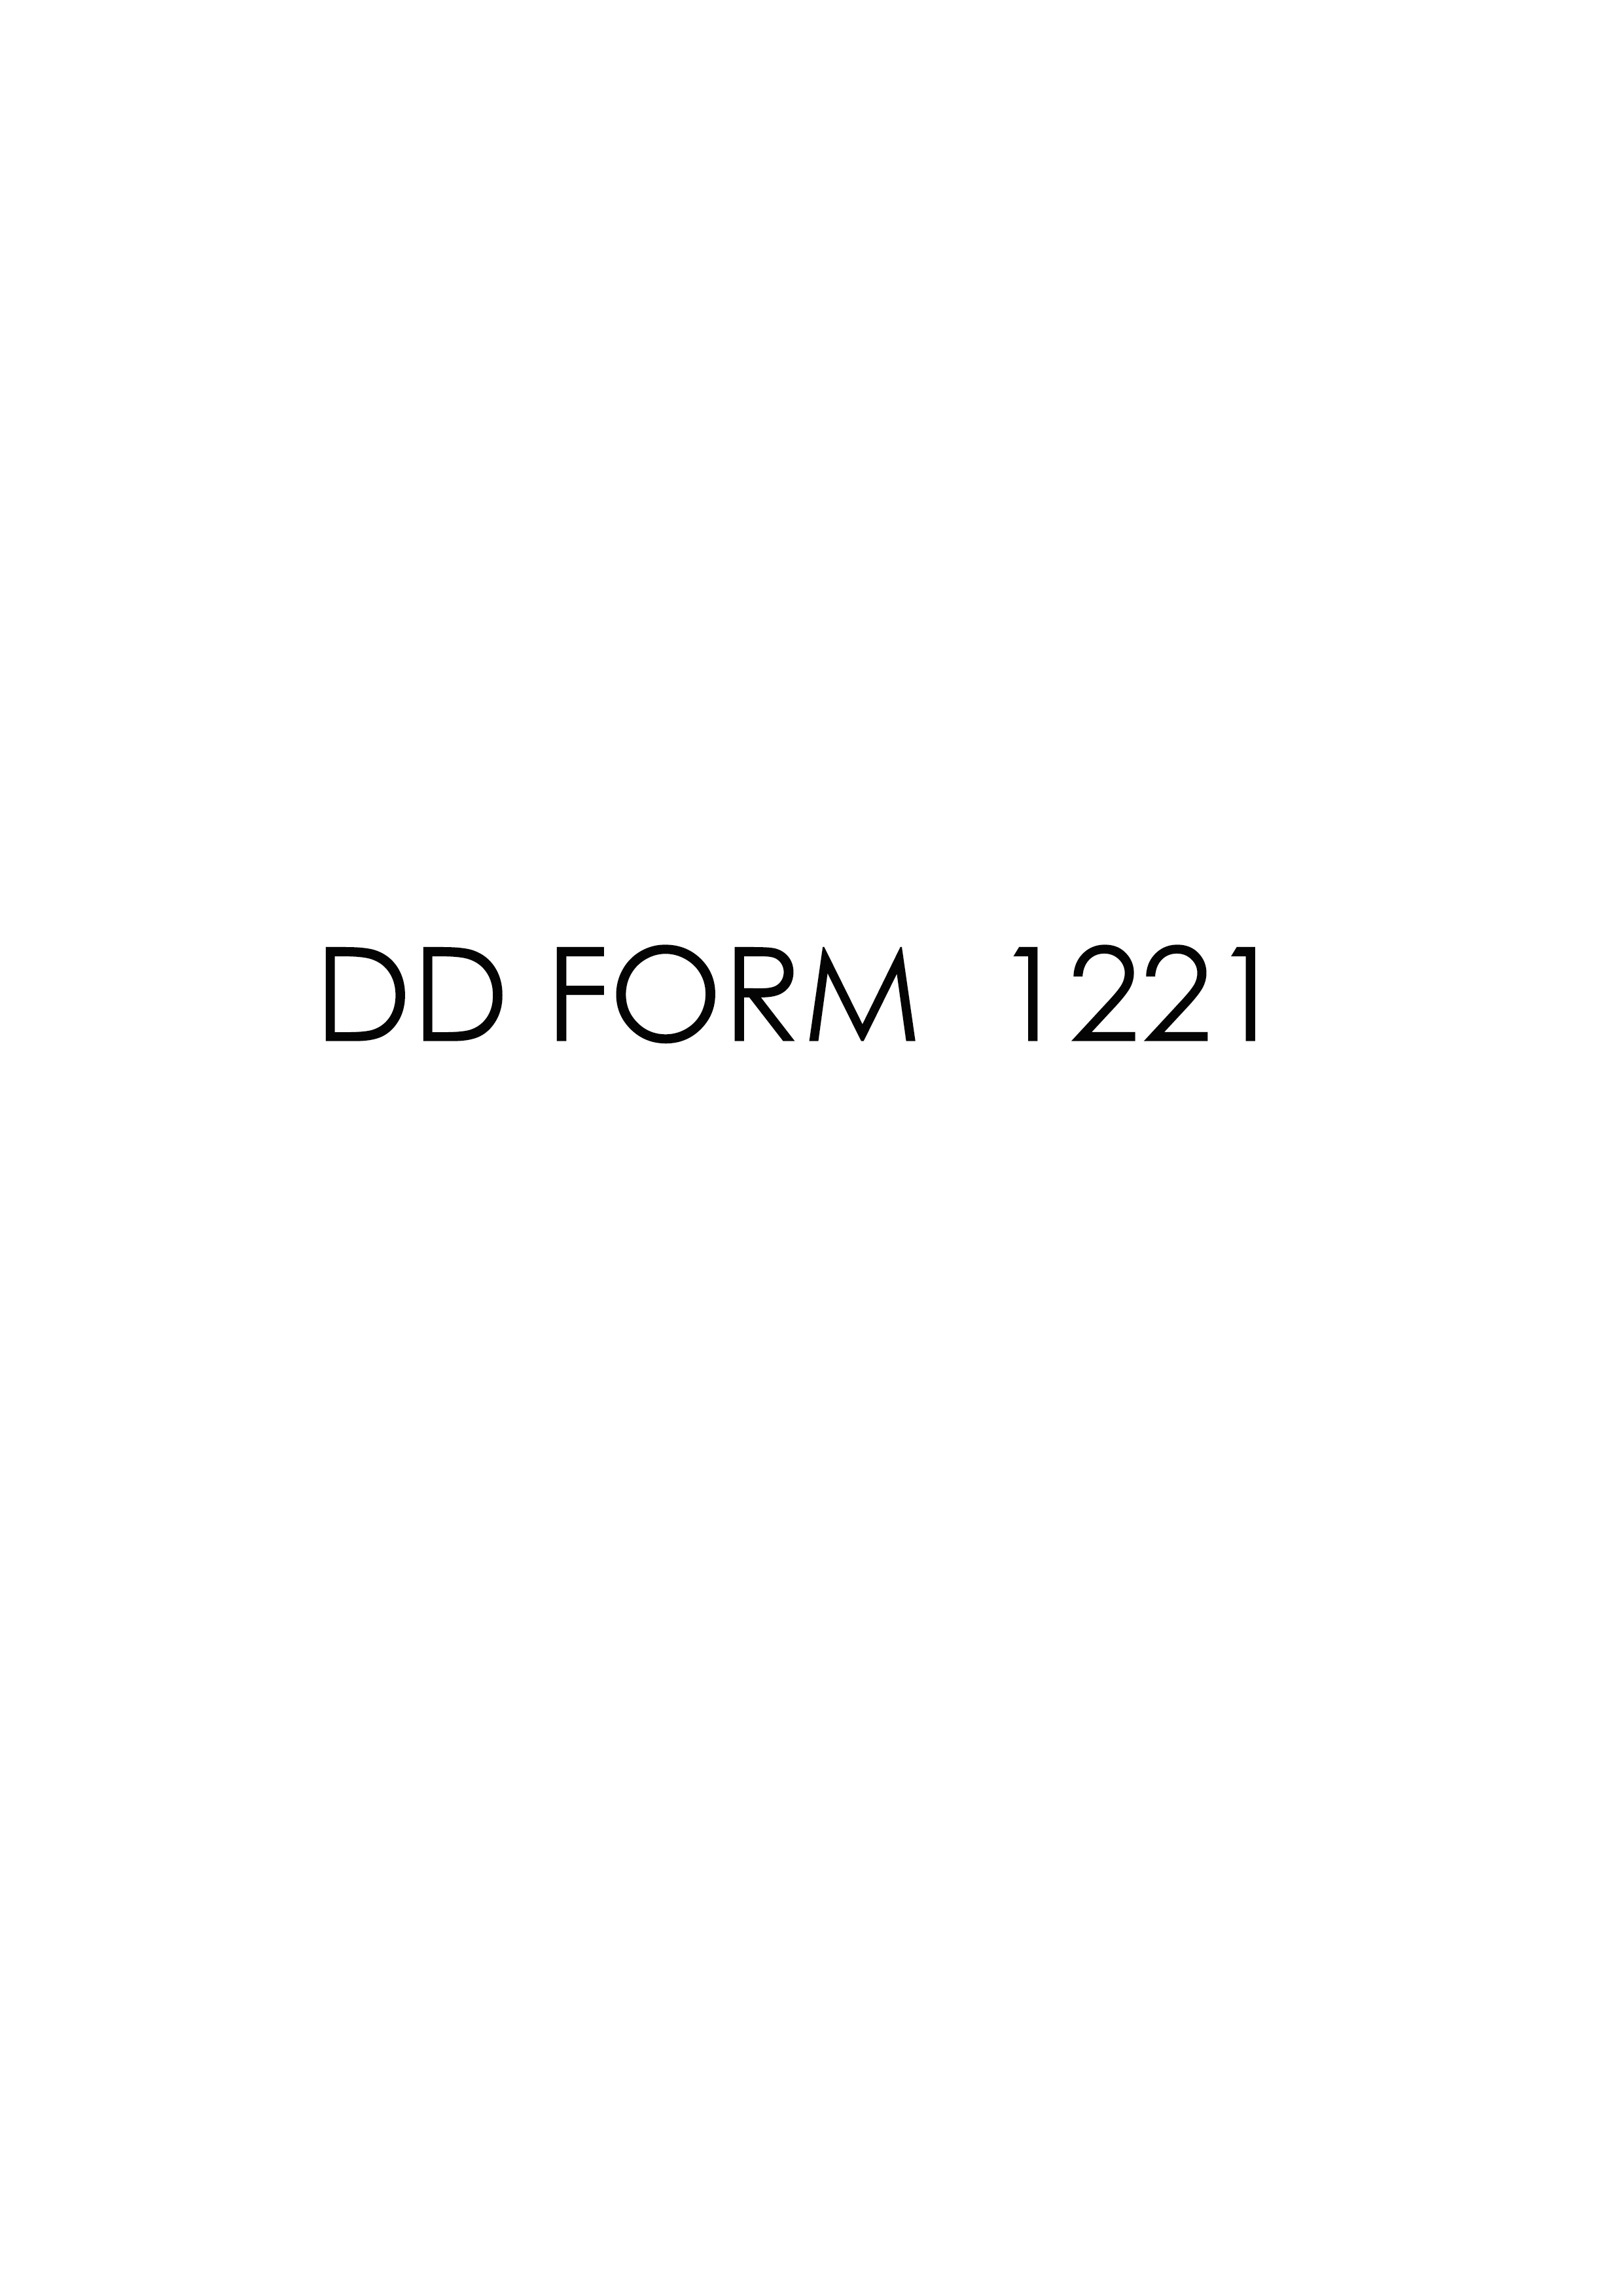 Download Fillable dd Form 1221